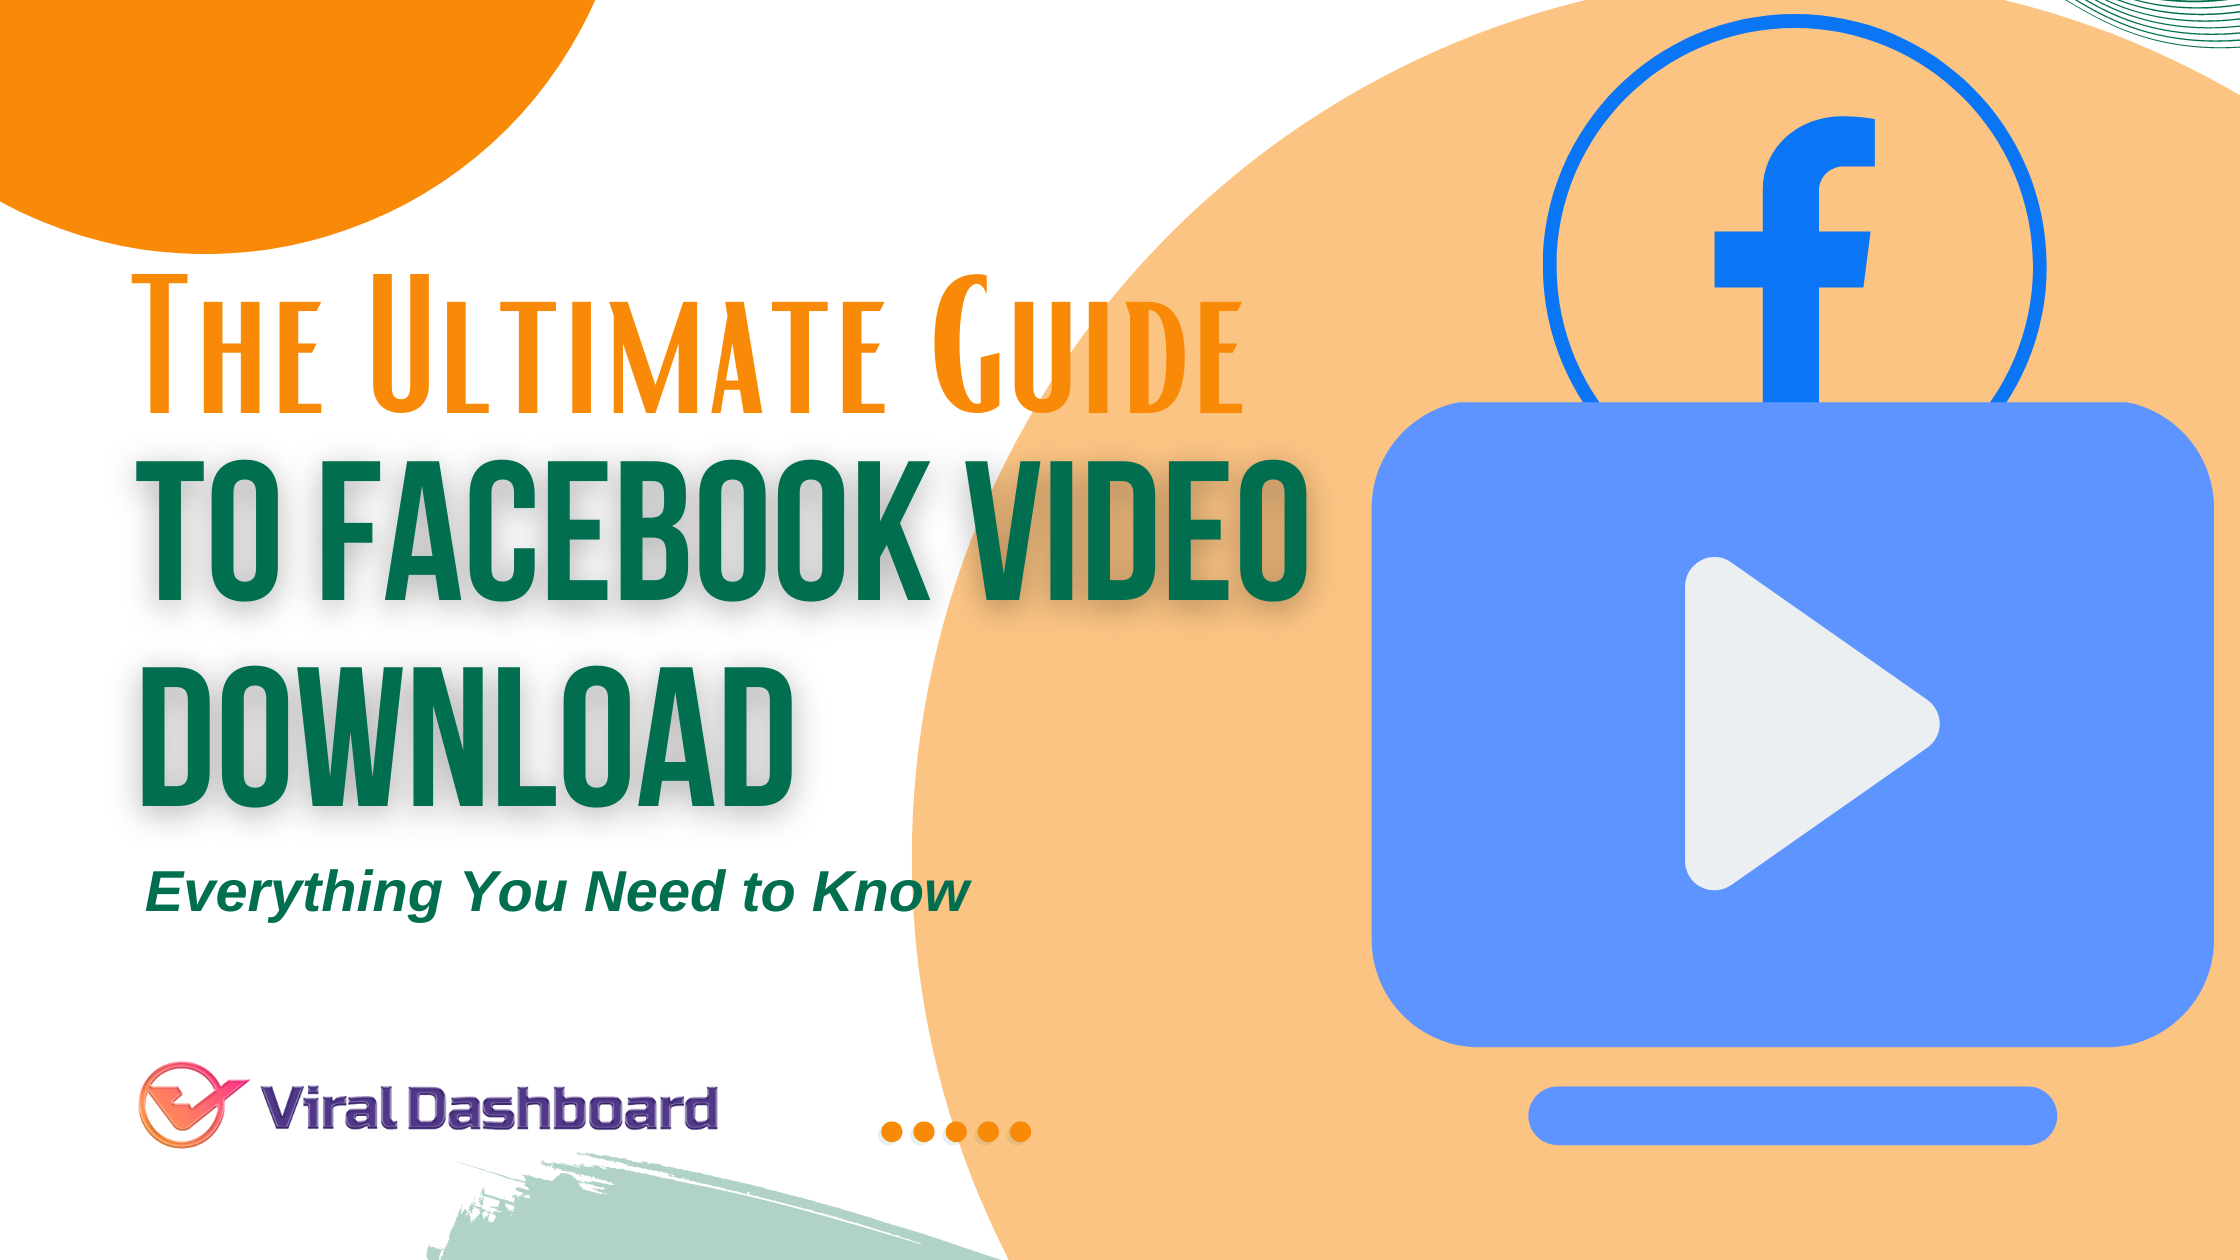 The Ultimate Guide to Facebook Video Download